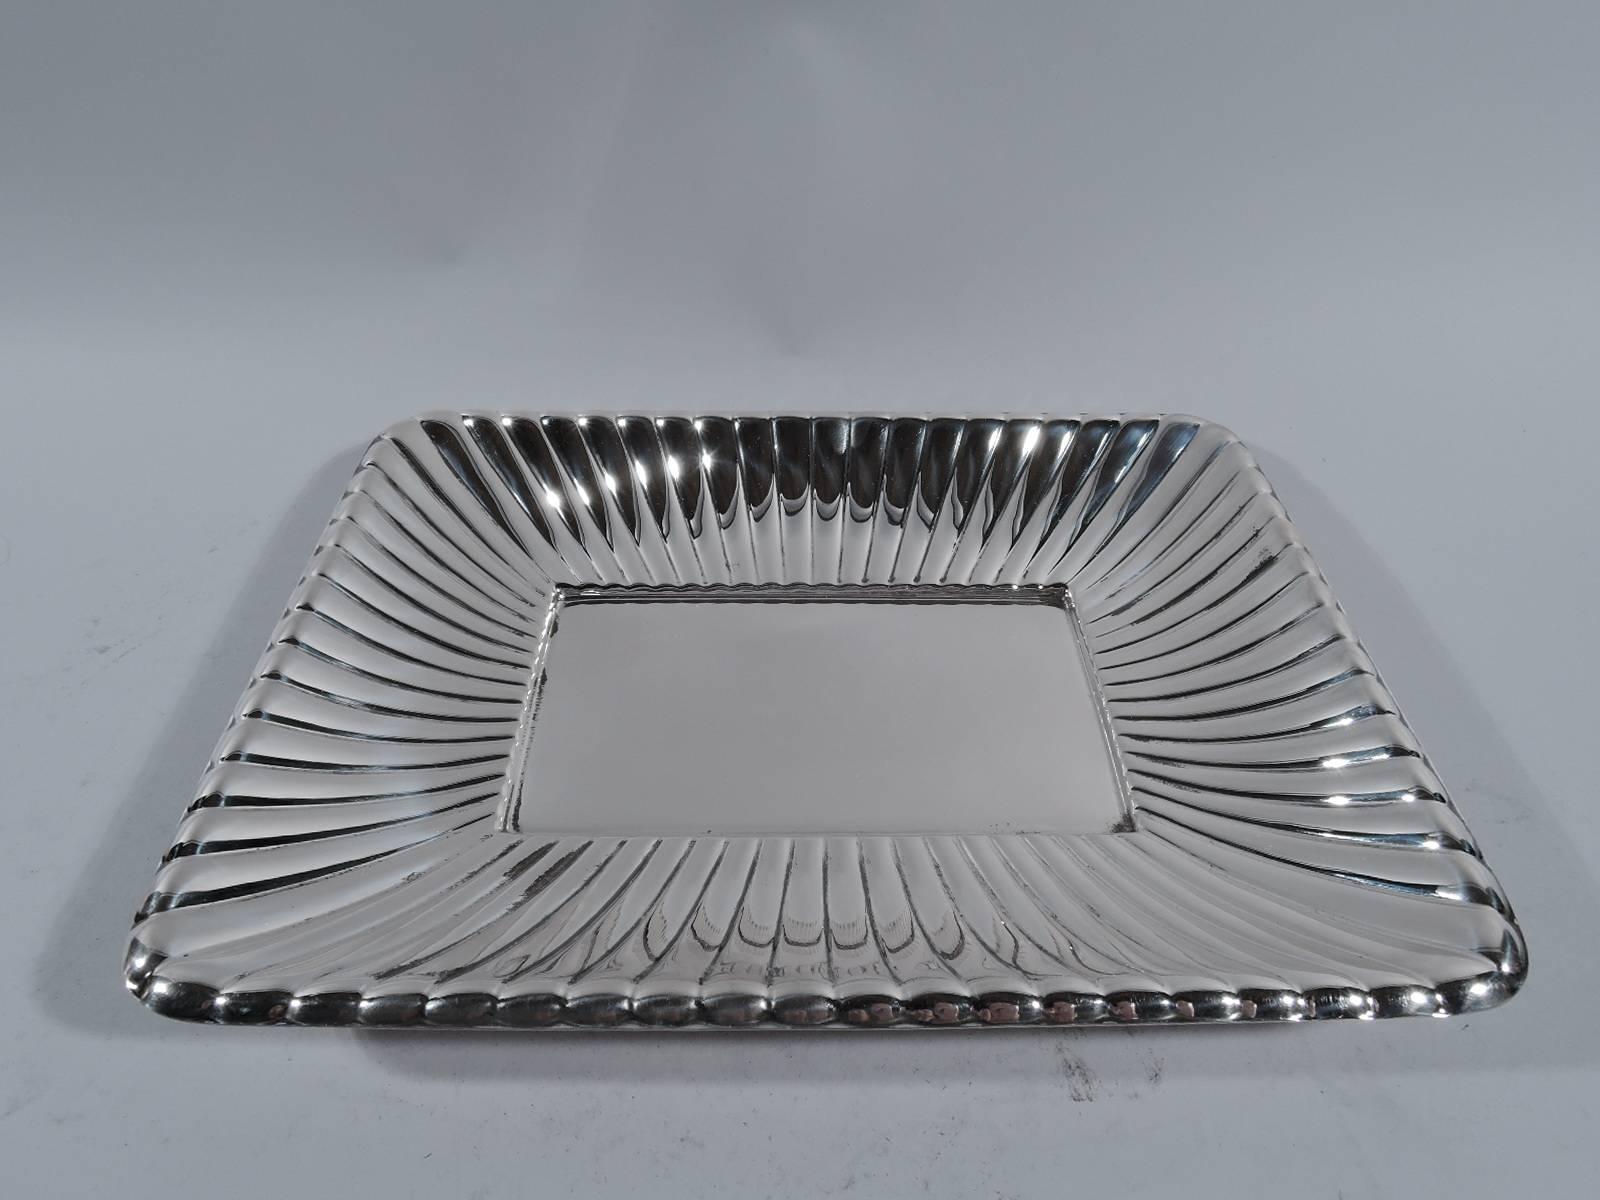 Unusual and Modern sterling silver bowl. Made by Cartier in New York. Shallow and rectangular with plain well surrounded by radiating gadrooning. Hallmark includes no. X302. Weight: 15 troy ounces.